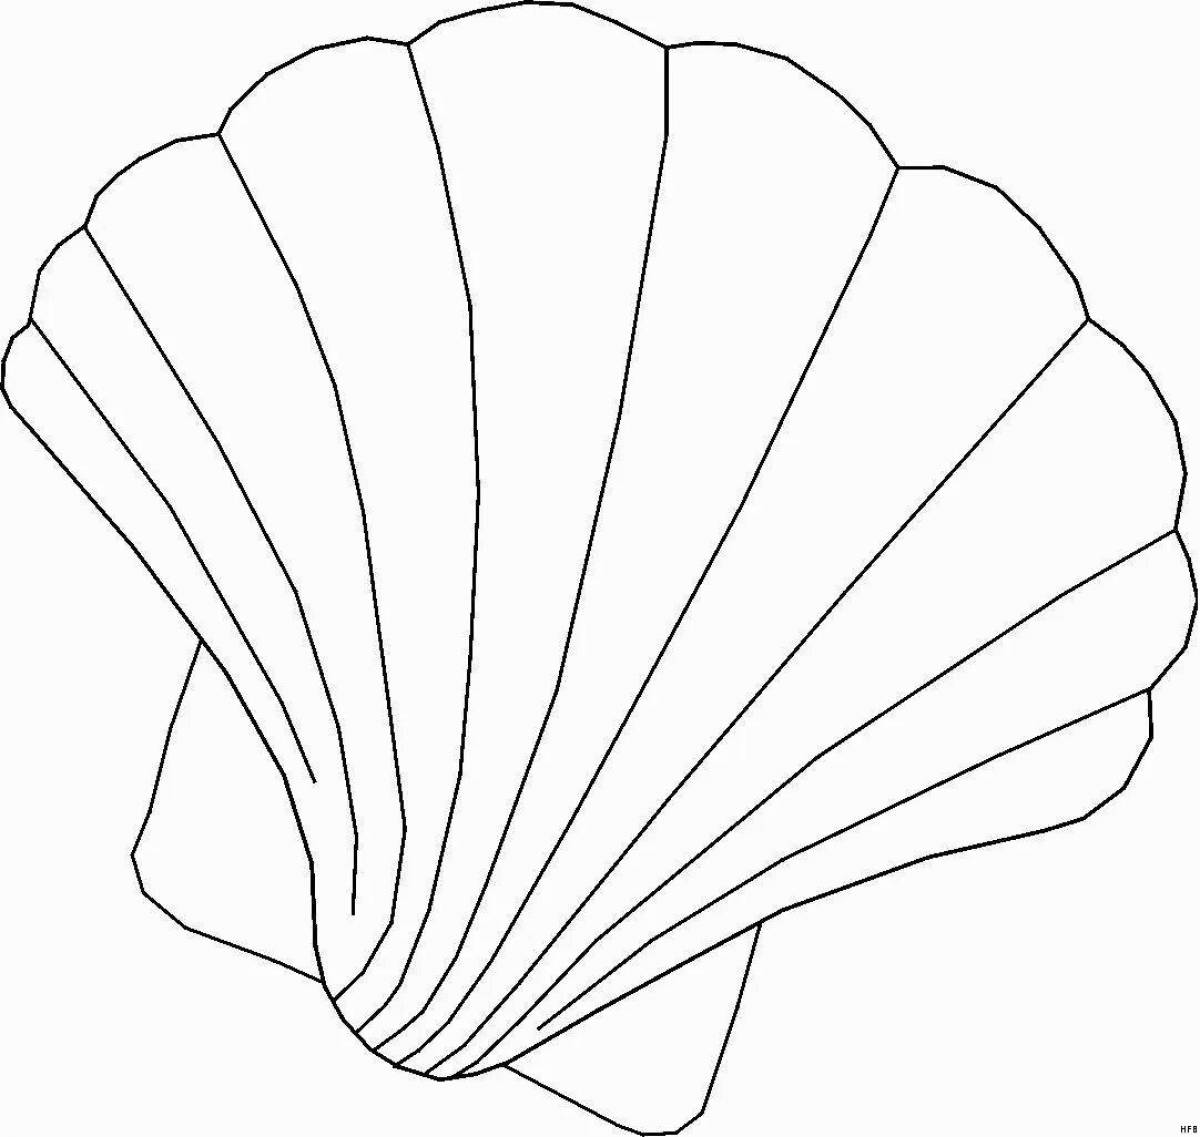 Coloring shell for kids